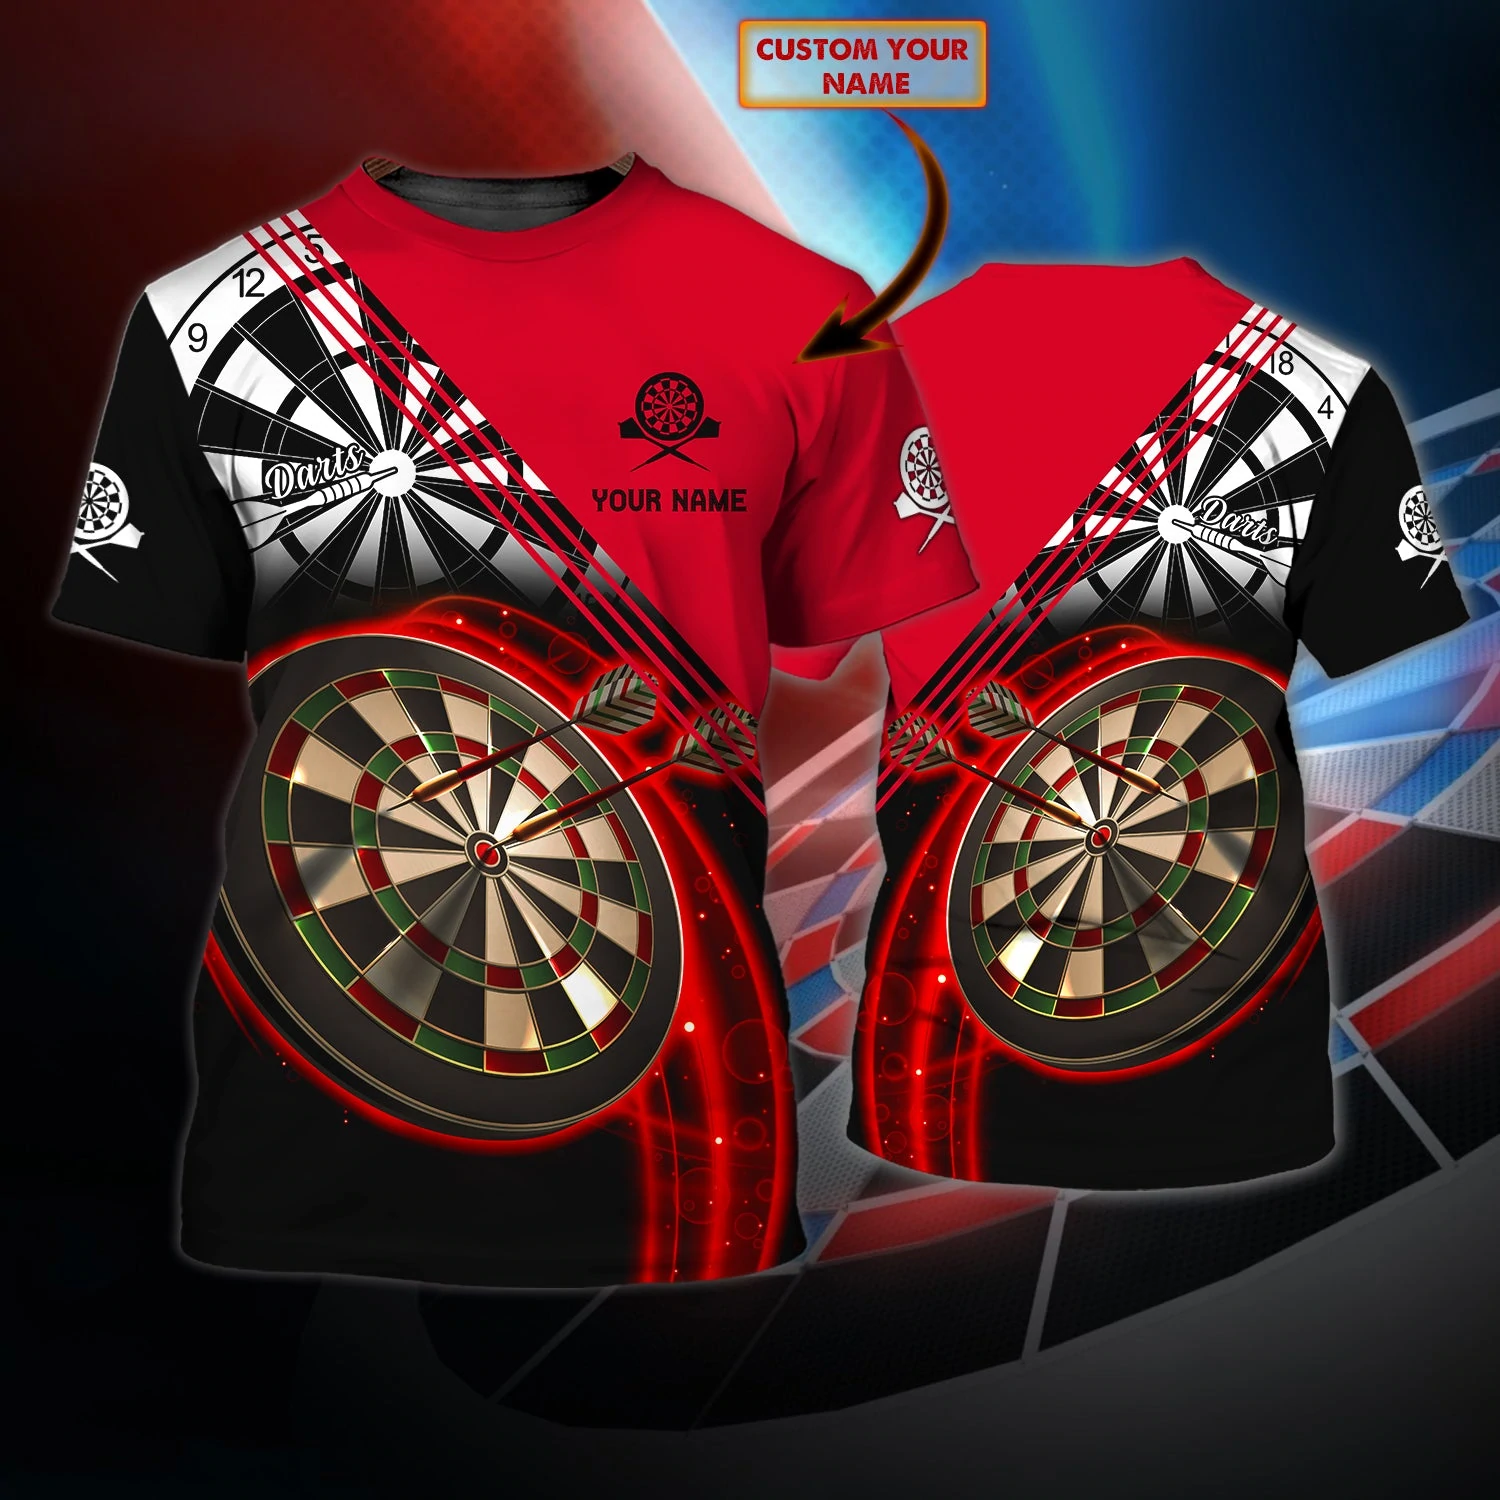 Darts 3D all over printed shirt for Men, Born To Play Darts – Personalized Name 3D Tshirt – DT131